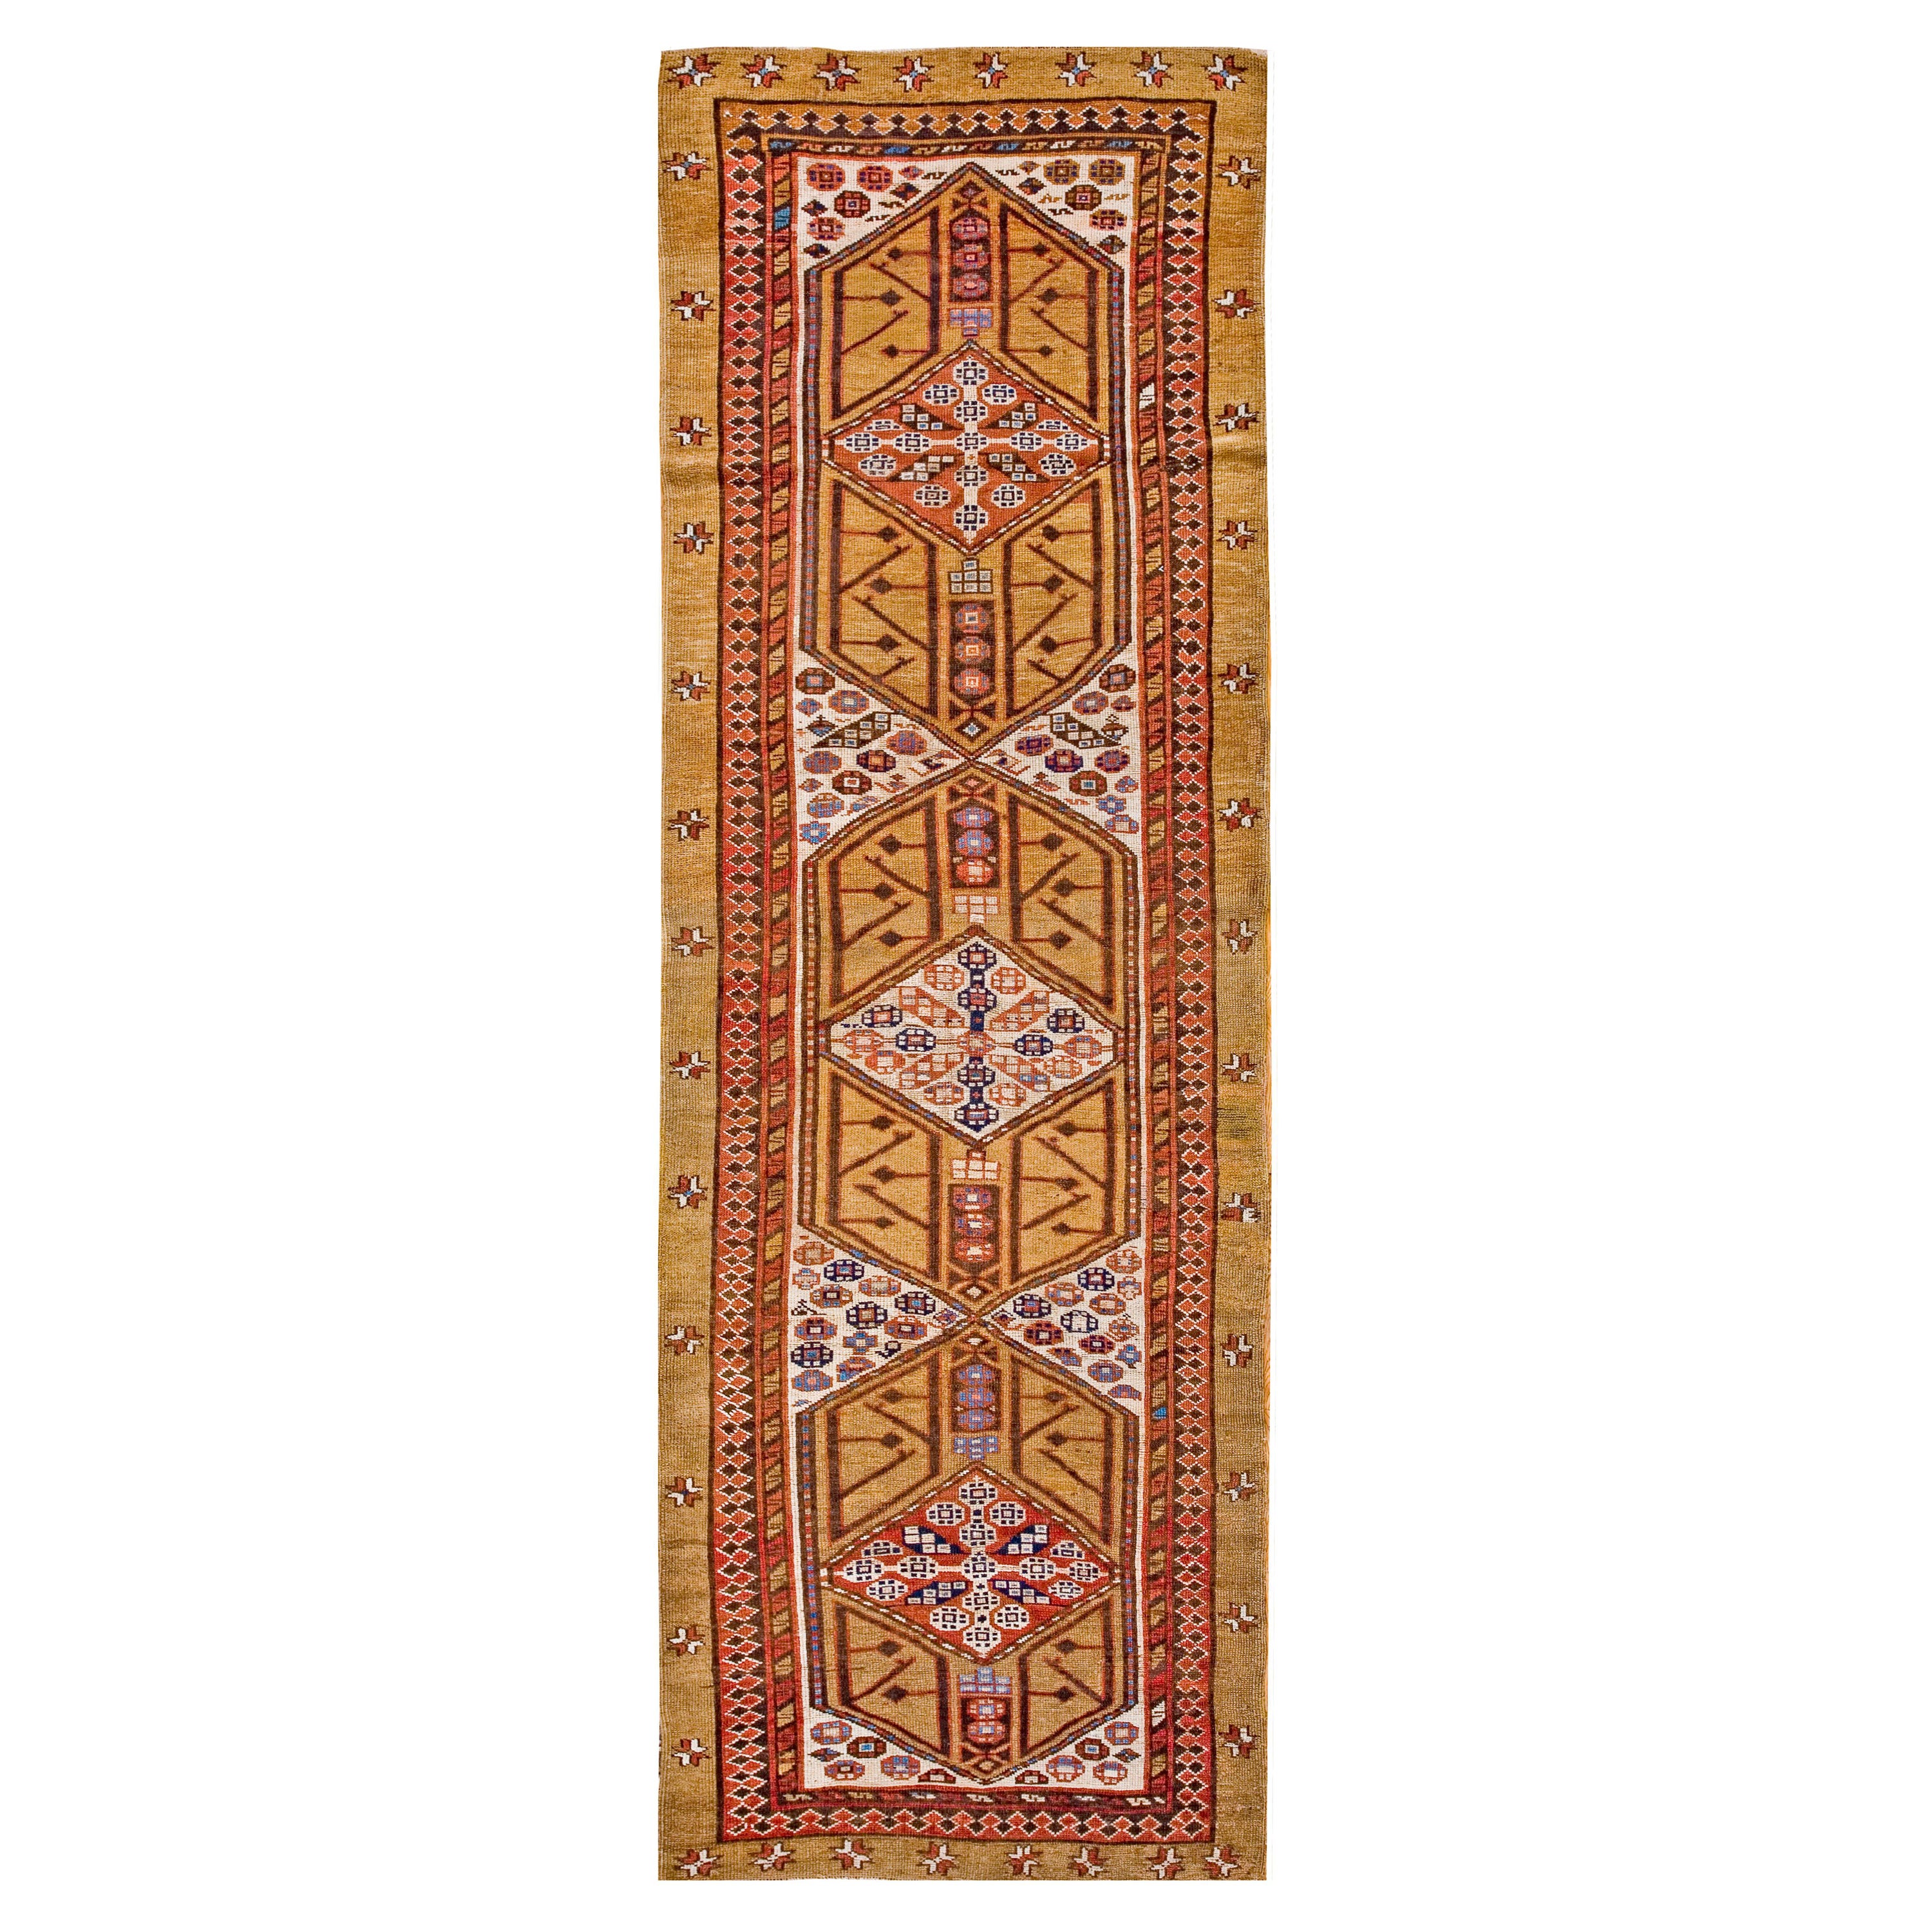 Late 19th Century NW Persian Serab Carpet ( 3' 7" x 10' 8" - 109 x 325 cm ) For Sale